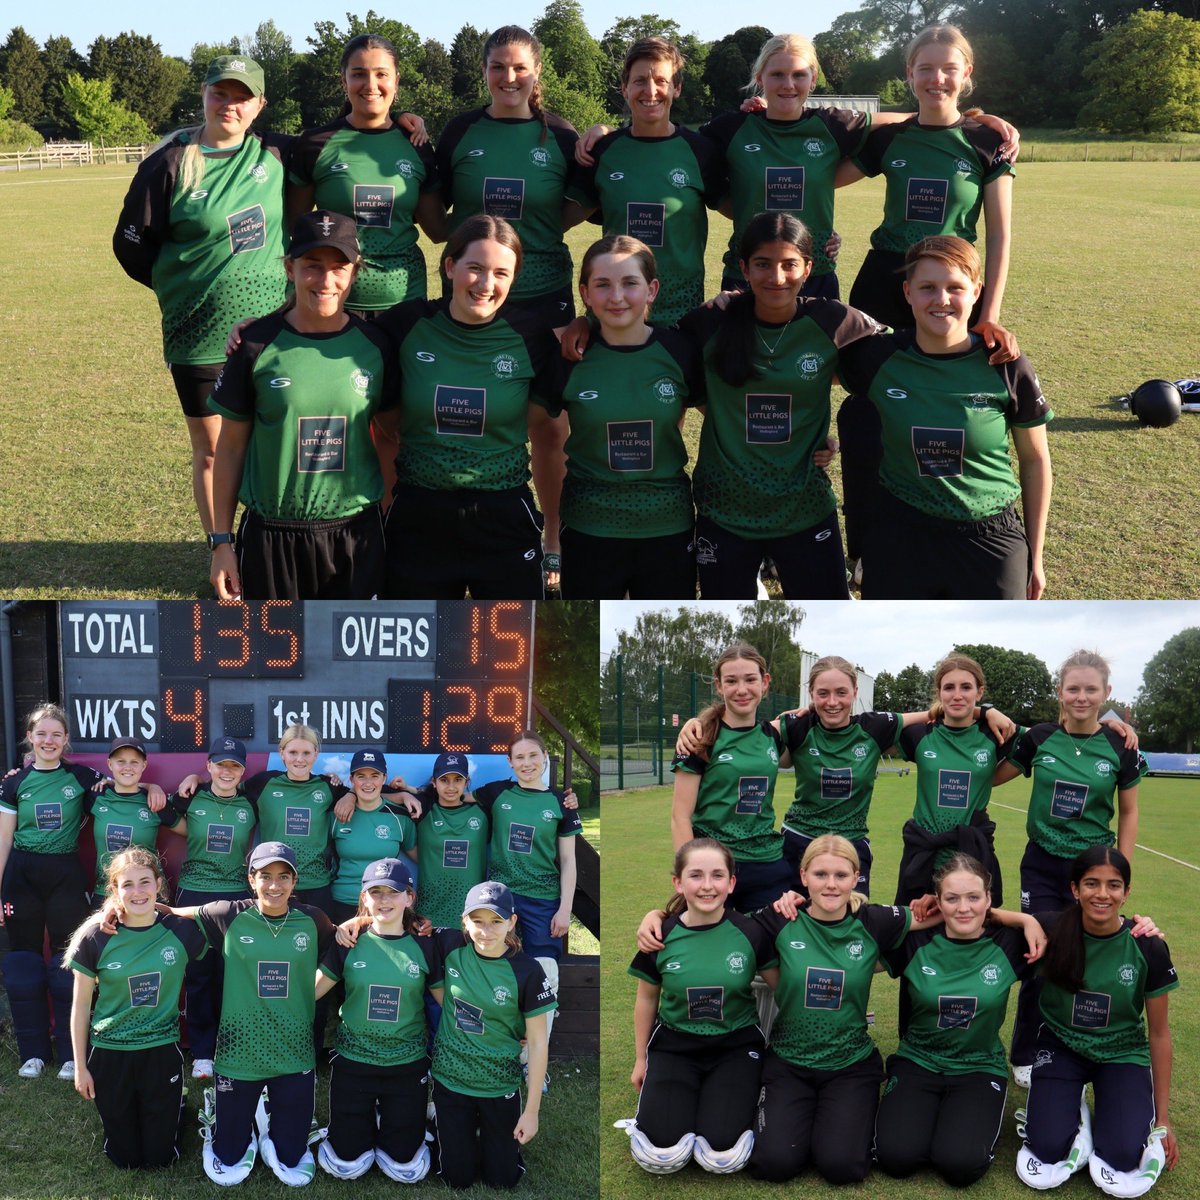 A tasty trio of ECB KO wins for 3 different Maverick teams in the last 5 days over @CirencesterCC @HenleyCCWomen @OxfordCCWomen